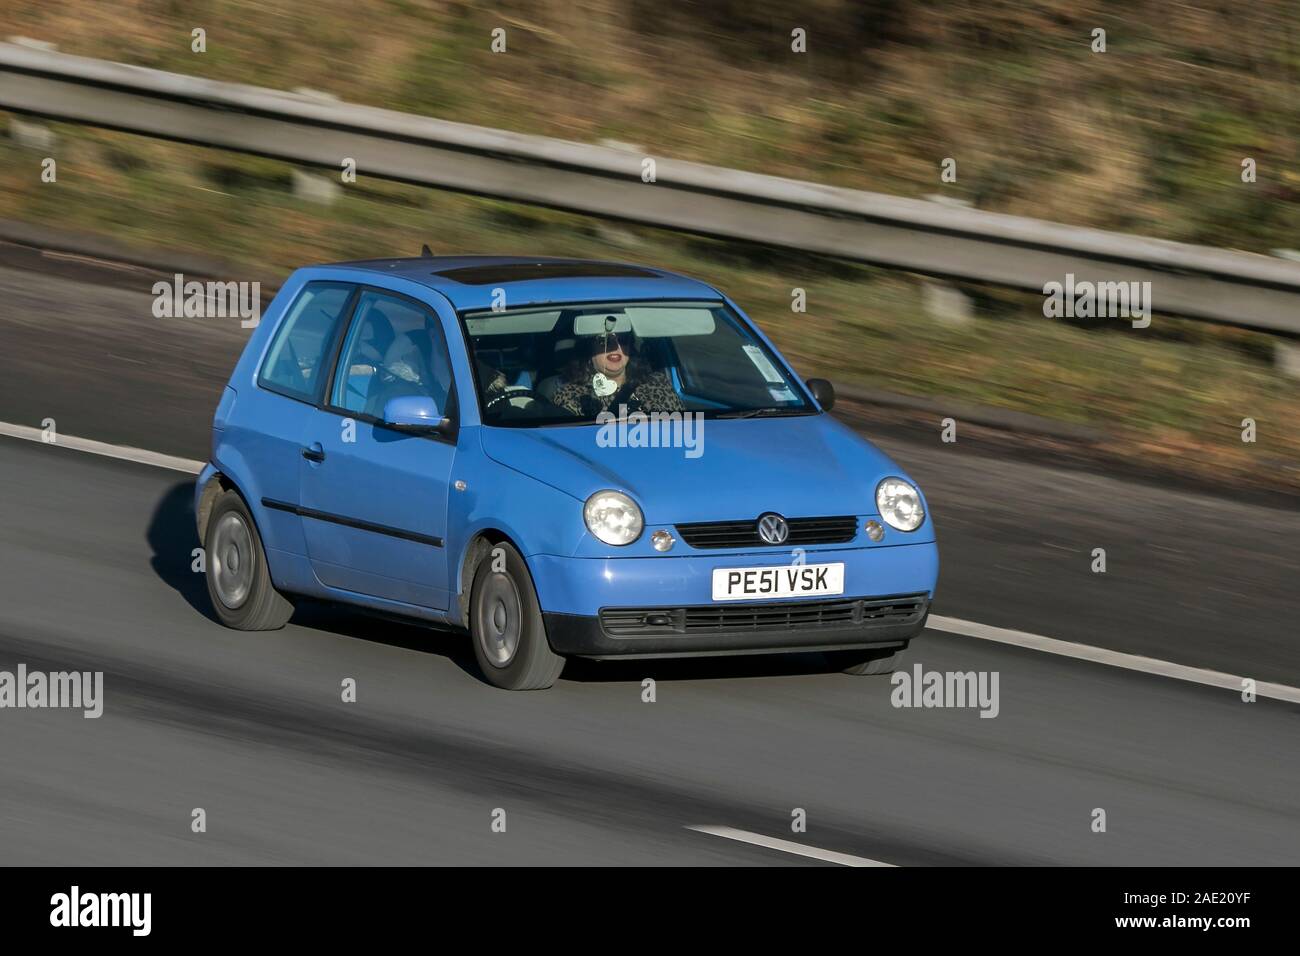 Blurred moving car VOLKSWAGEN Lupo E Auto traveling at speed on the M61 motorway Slow camera shutter speed vehicle movement Stock Photo